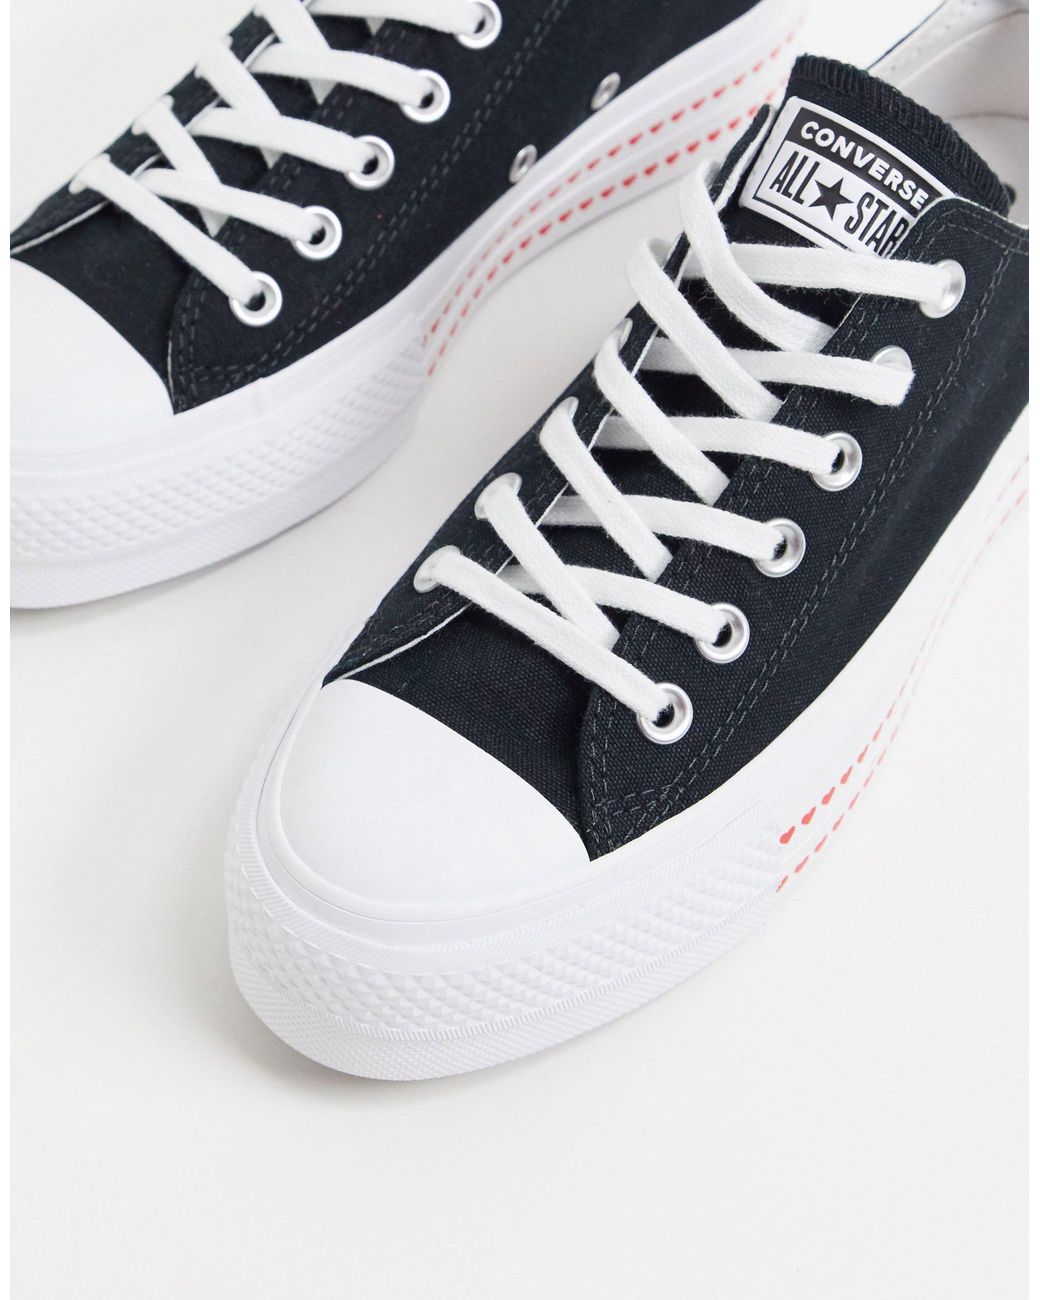 converse black heart trainers